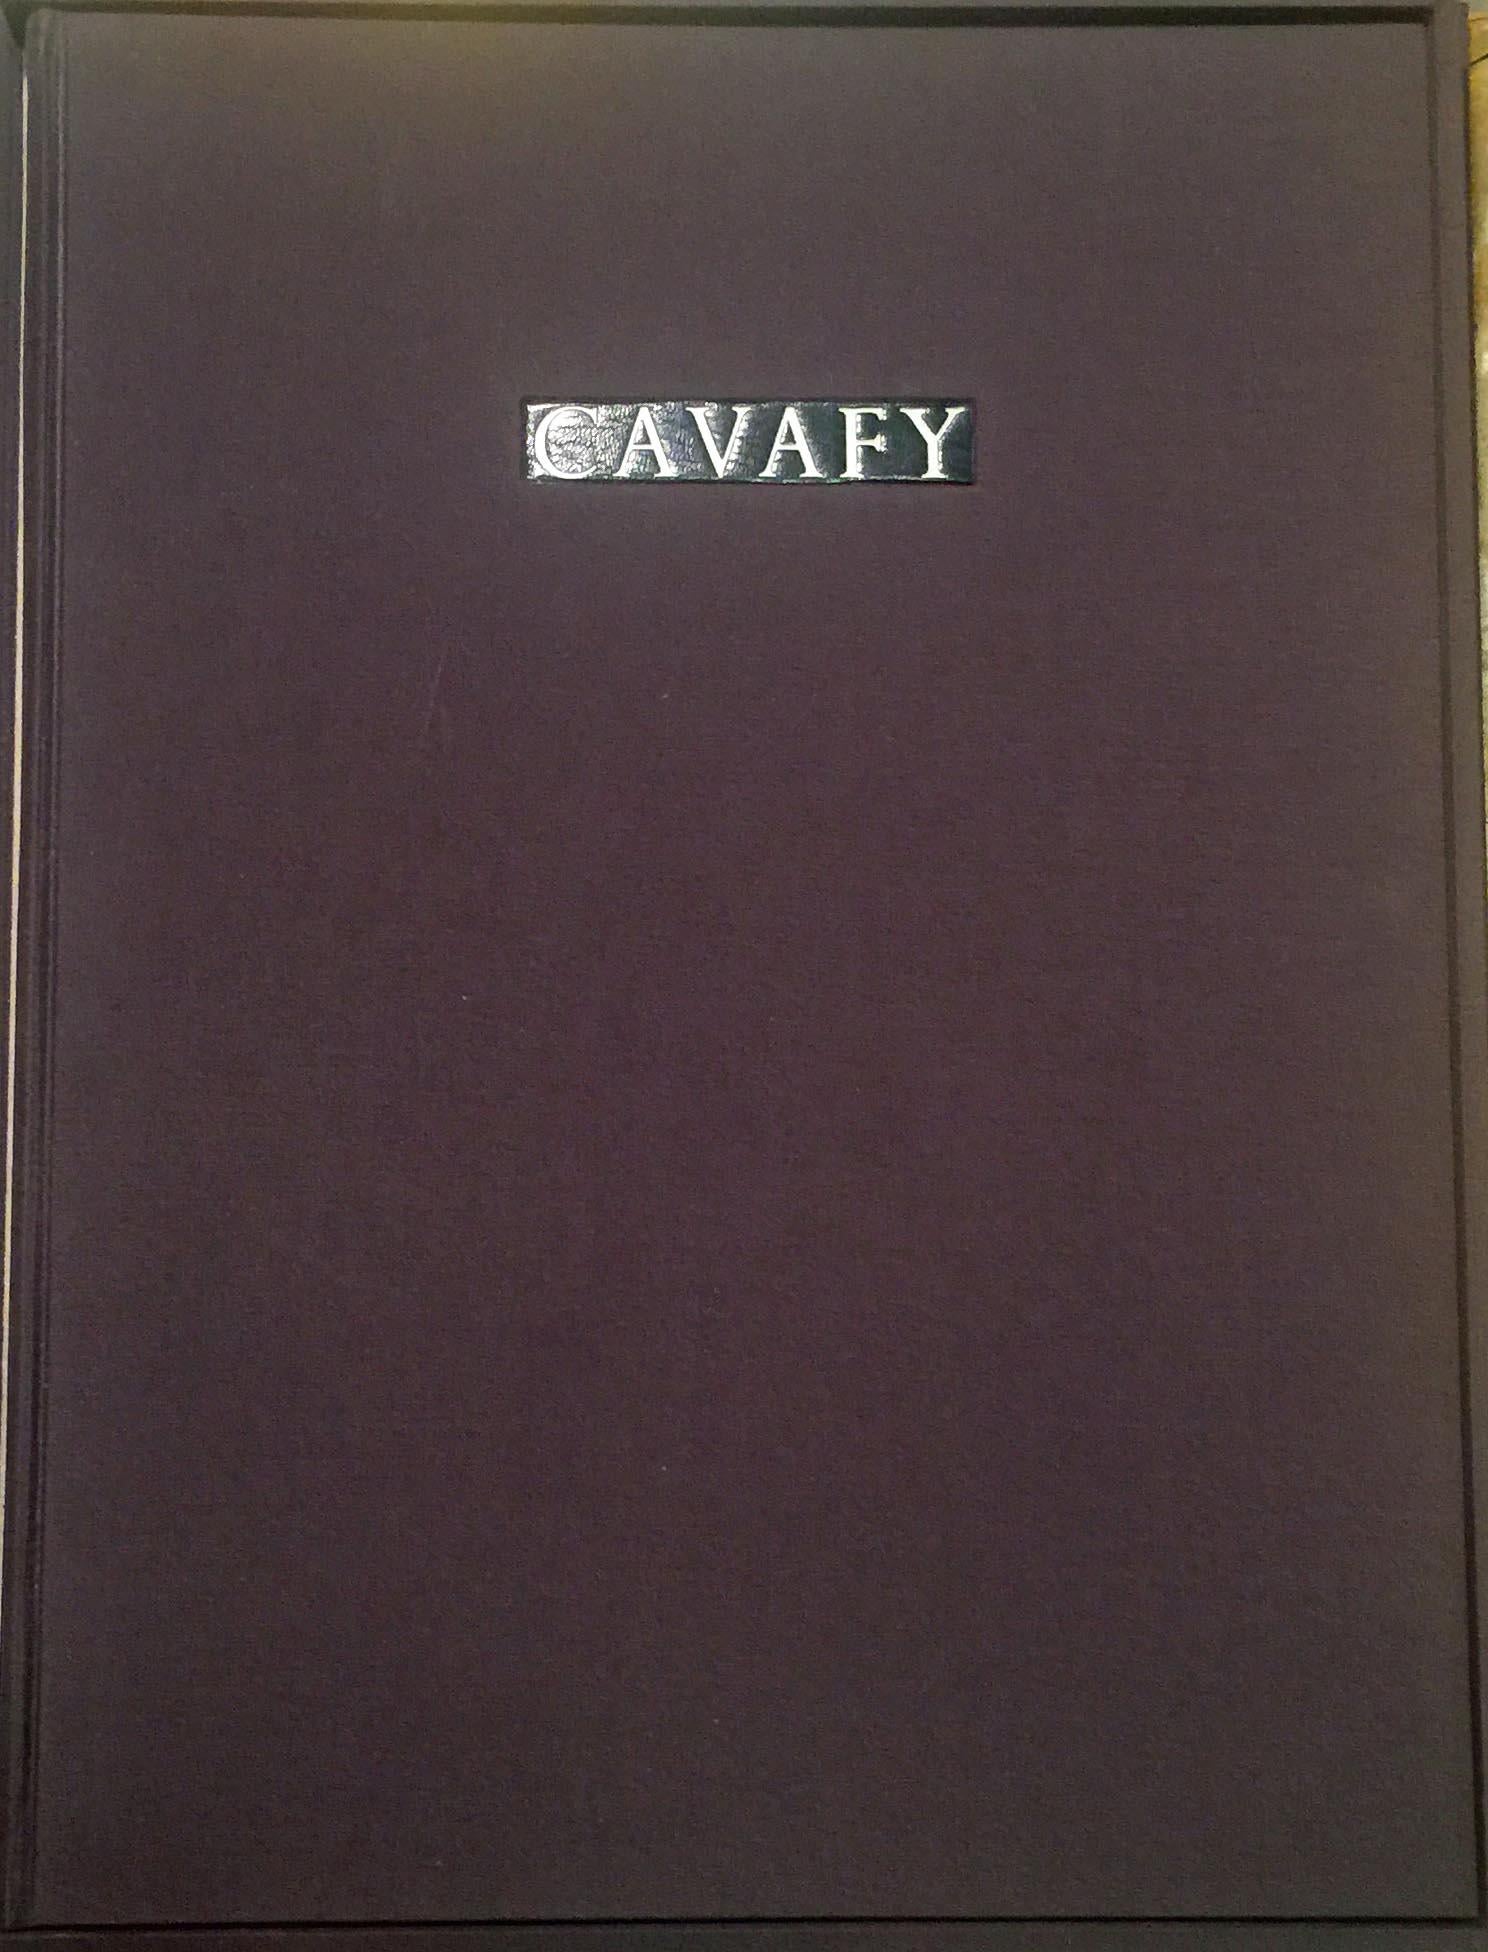 A TRIBUTE TO CAVAFY - A SELECTION OF POEMS WITH PHOTOGRAVURES BY DUANE MICHALS 3